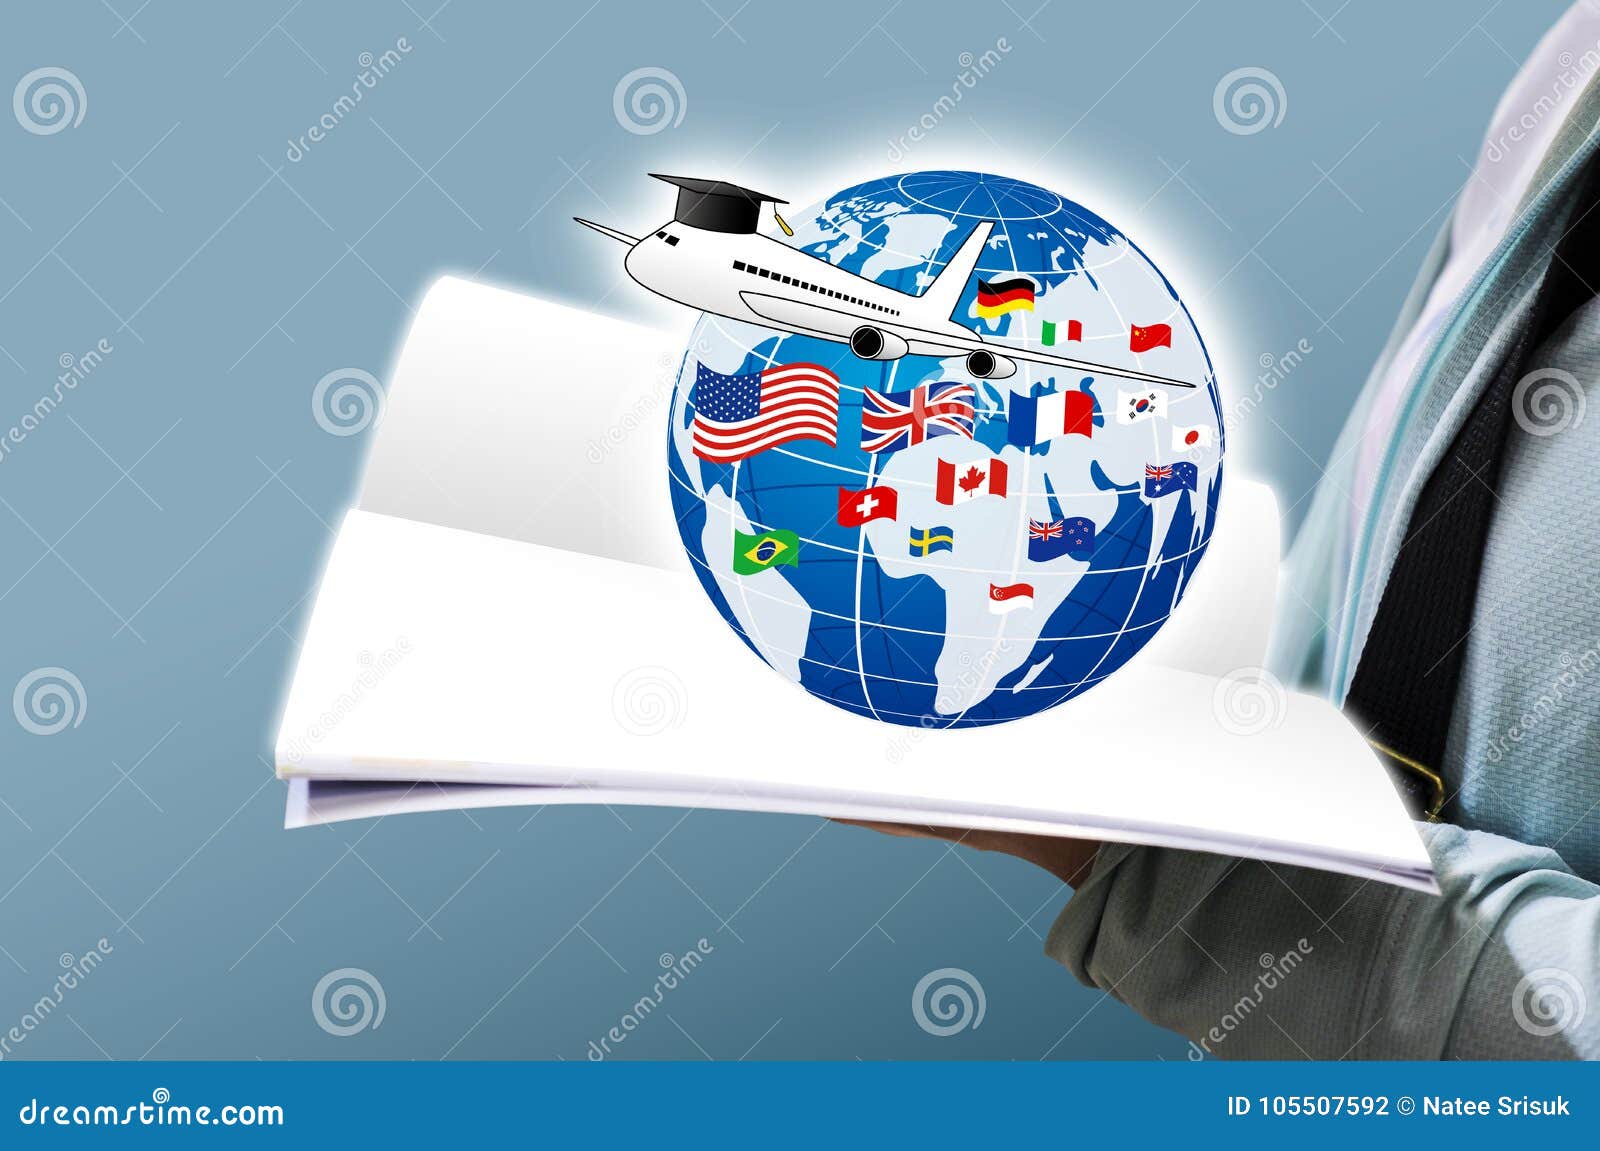 Study Abroad Concept Design Stock Photo - Image of germany, degree